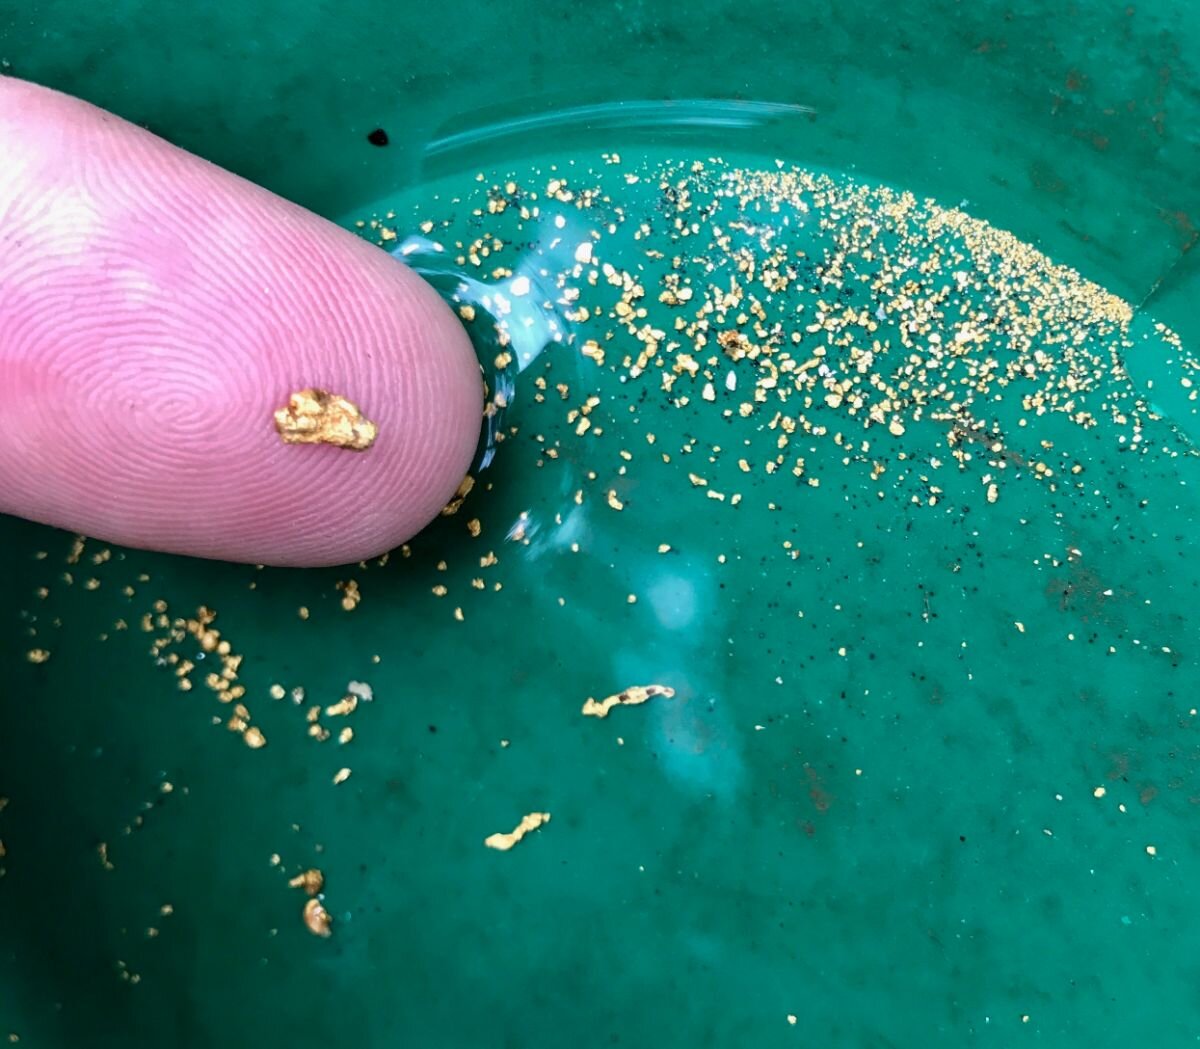 Gold Panning Kit Great for learning panning